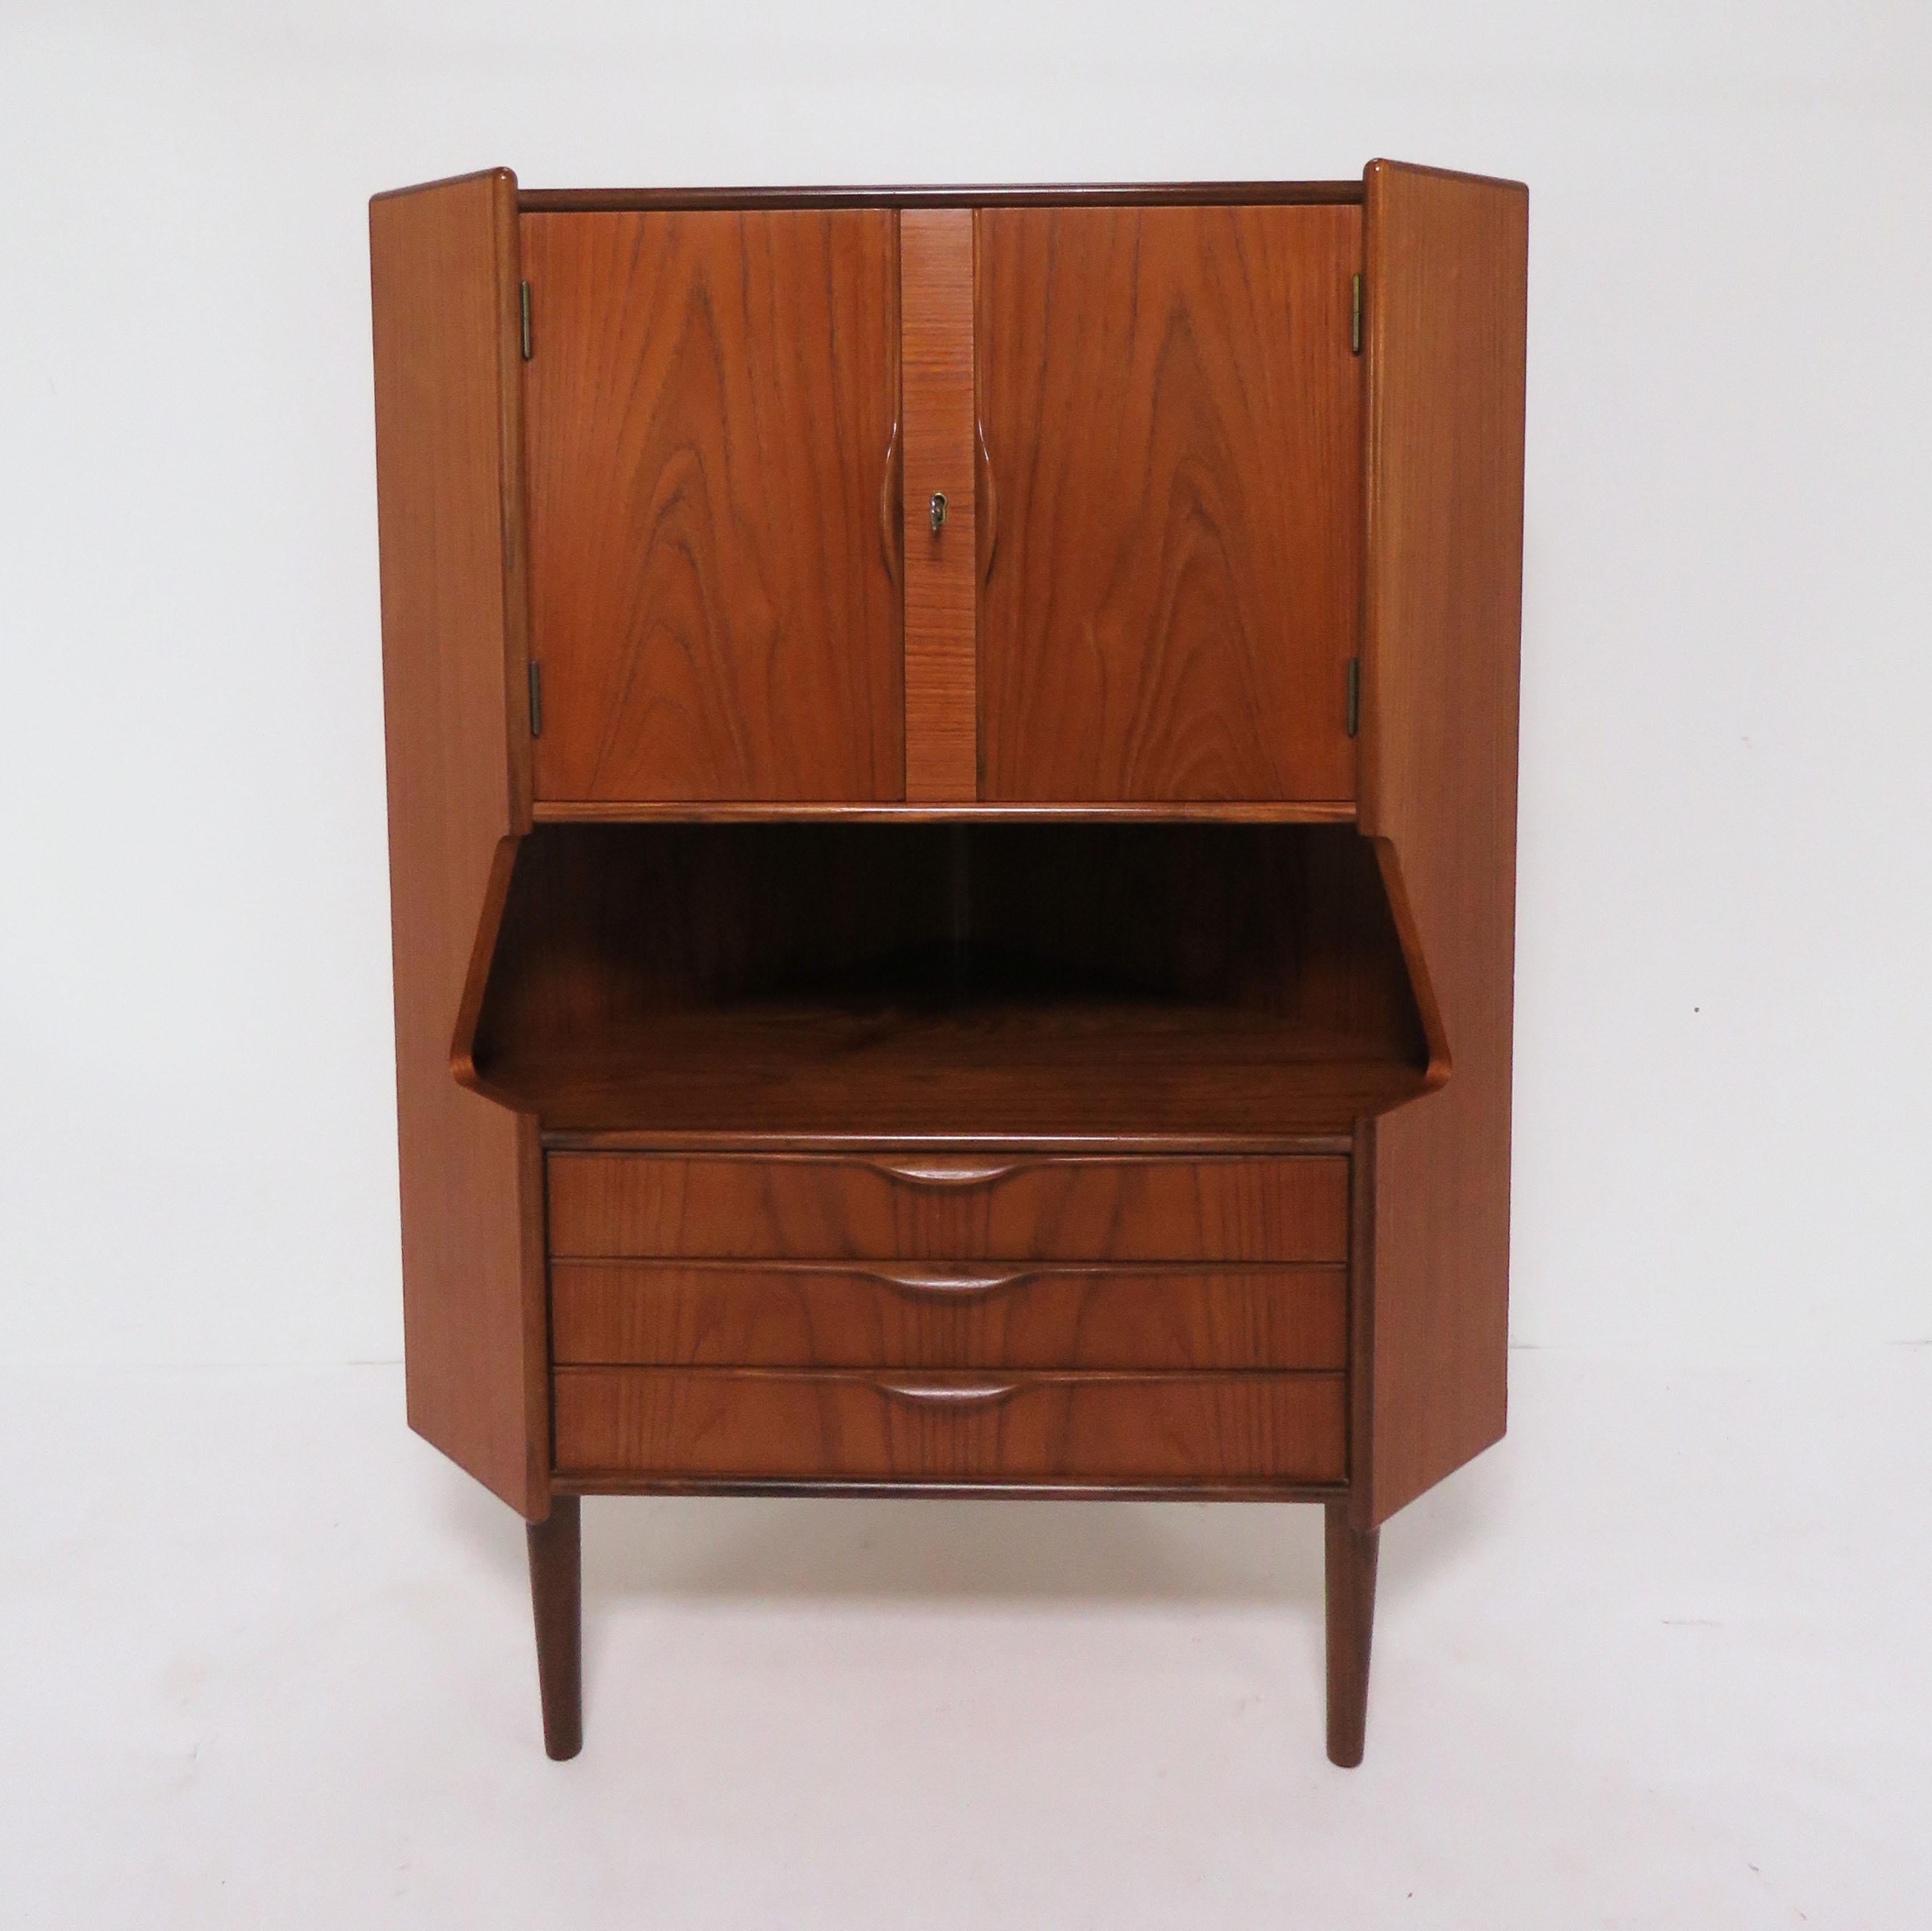 Teak corner cabinet designed by Gunni Omann for Omann Jun, Denmark, circa 1960s. Features three drawers and an open serving space, two doors above (with key) offer storage for barware.

Measures 48.25